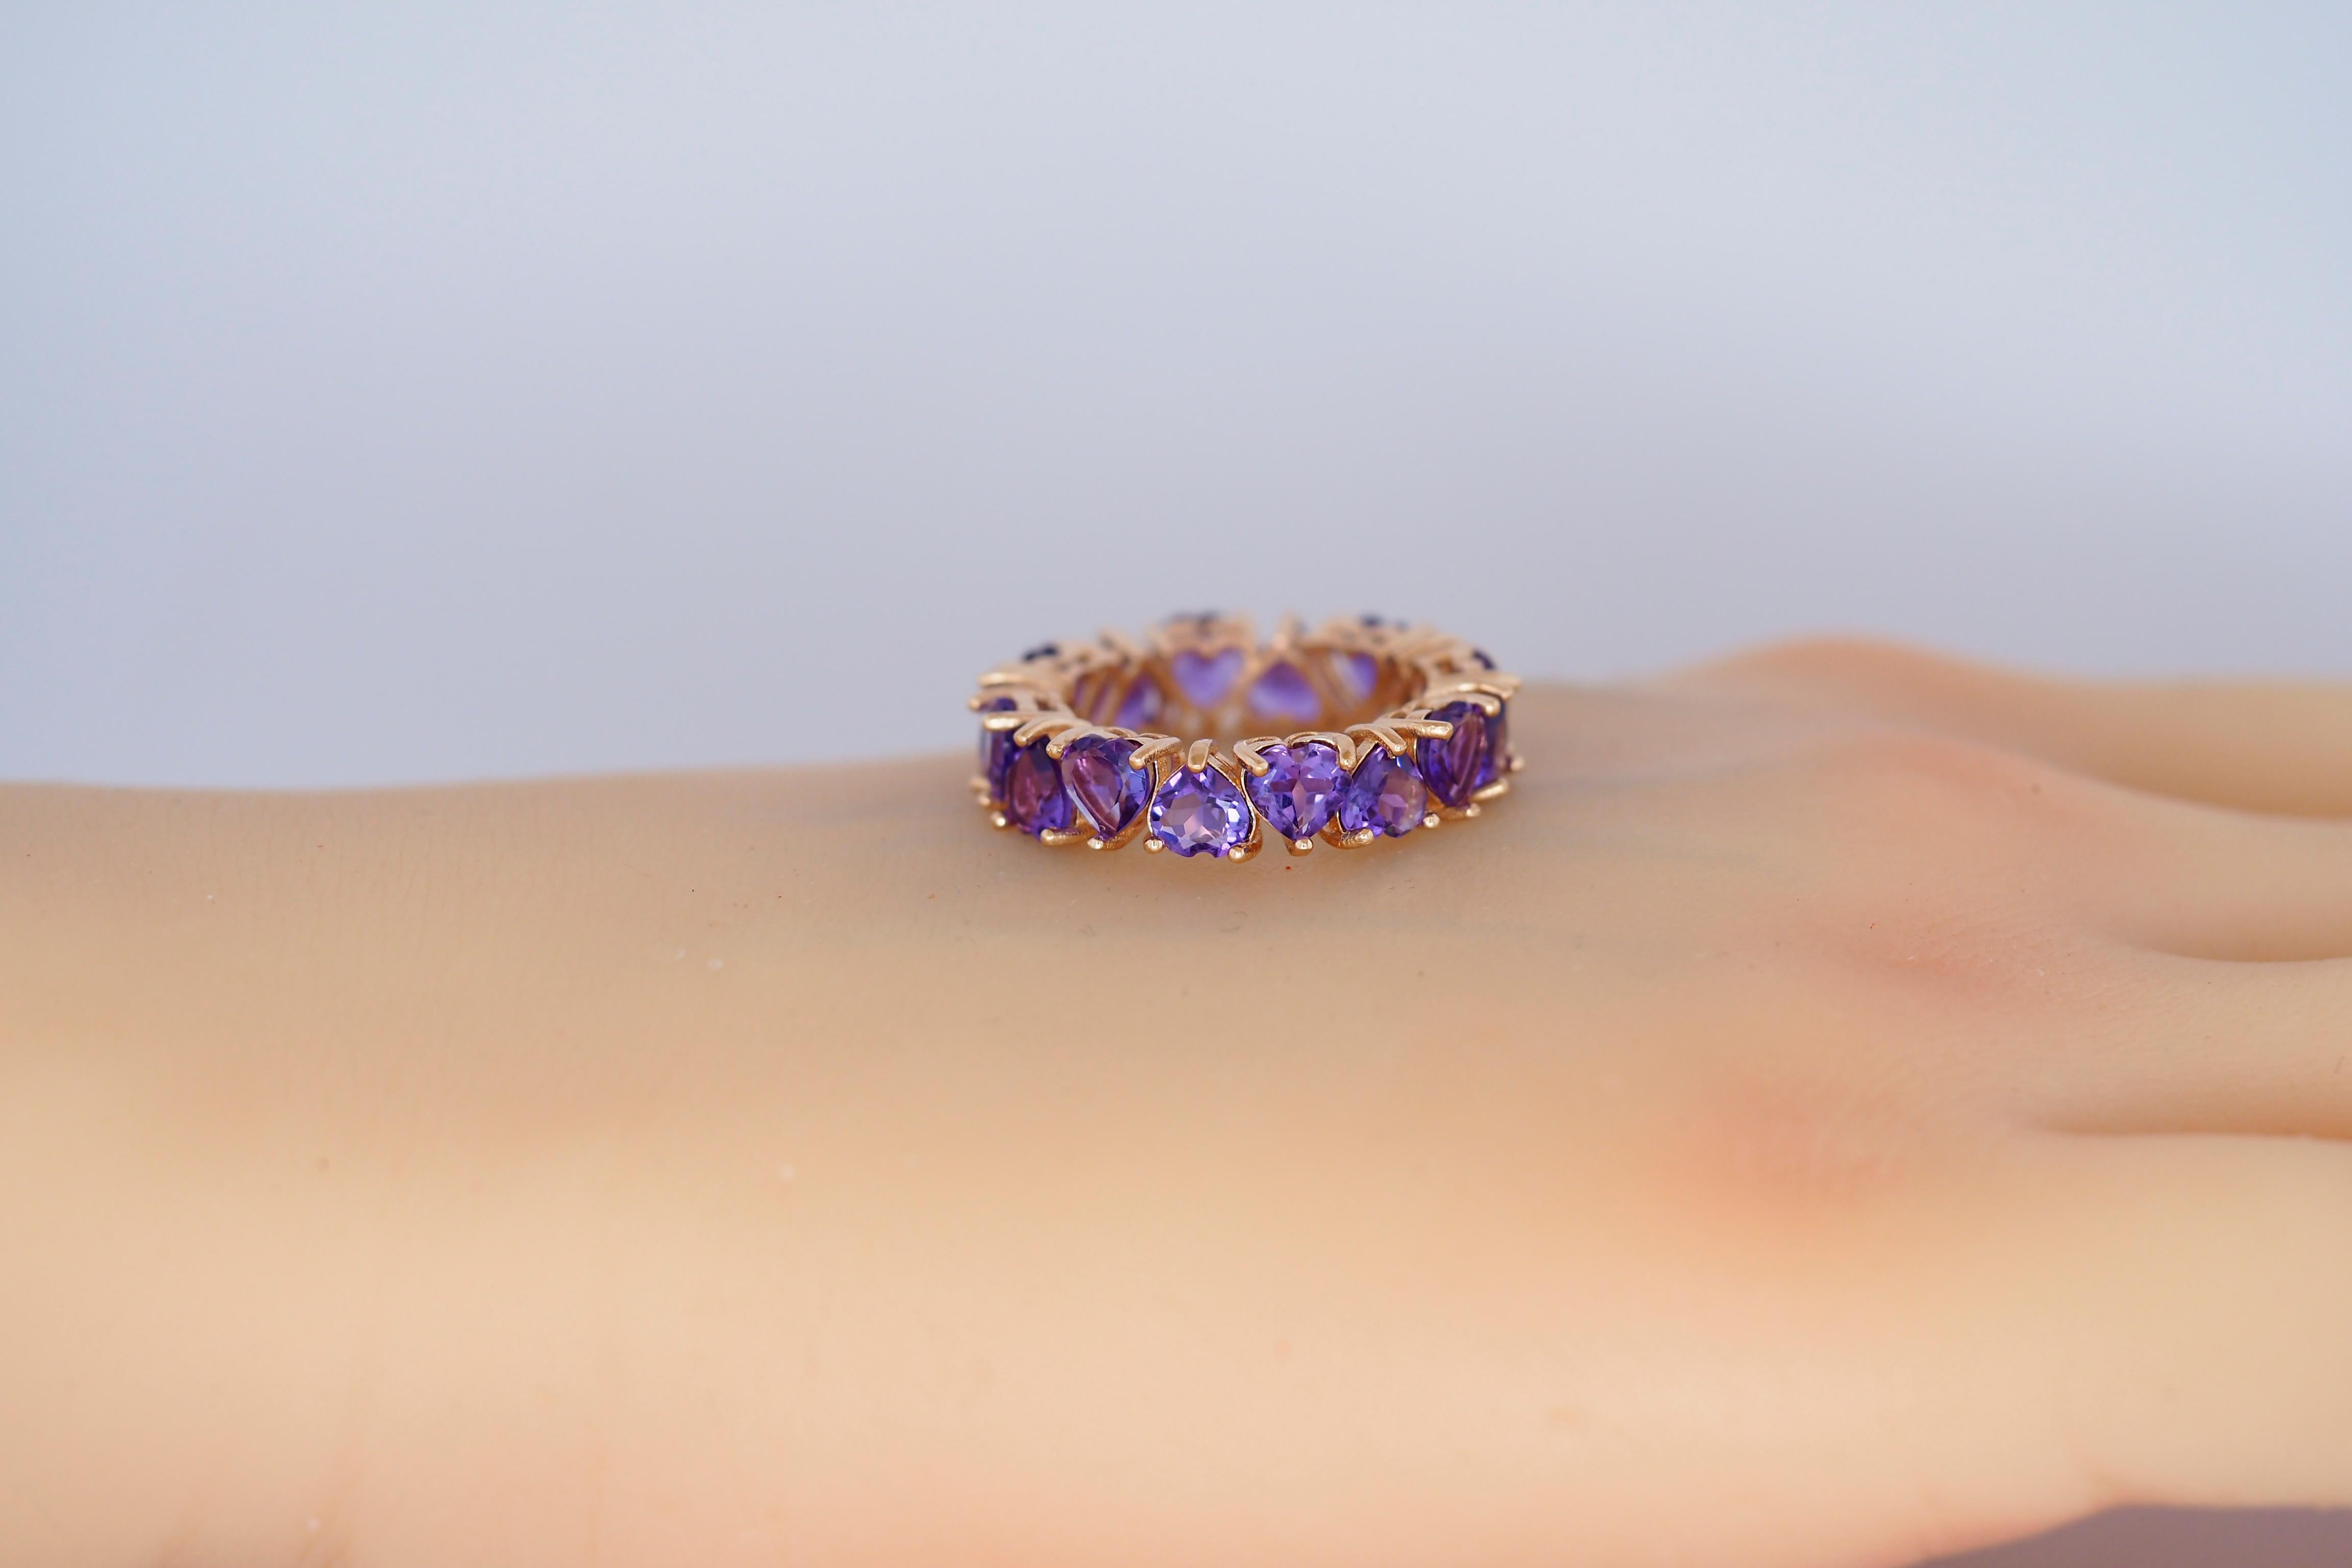 Heart Amethyst Eternity Ring in 14k gold. 
Heart Shaped Eternity Band. Amethyst Stacking Ring. Valentine Jewelry gift. Love ring for her.

Metal: 14k gold
Weight: 2.2 g. (depends from size)

Gemstones:
Natural Amethysts: weight - approx 7 ct